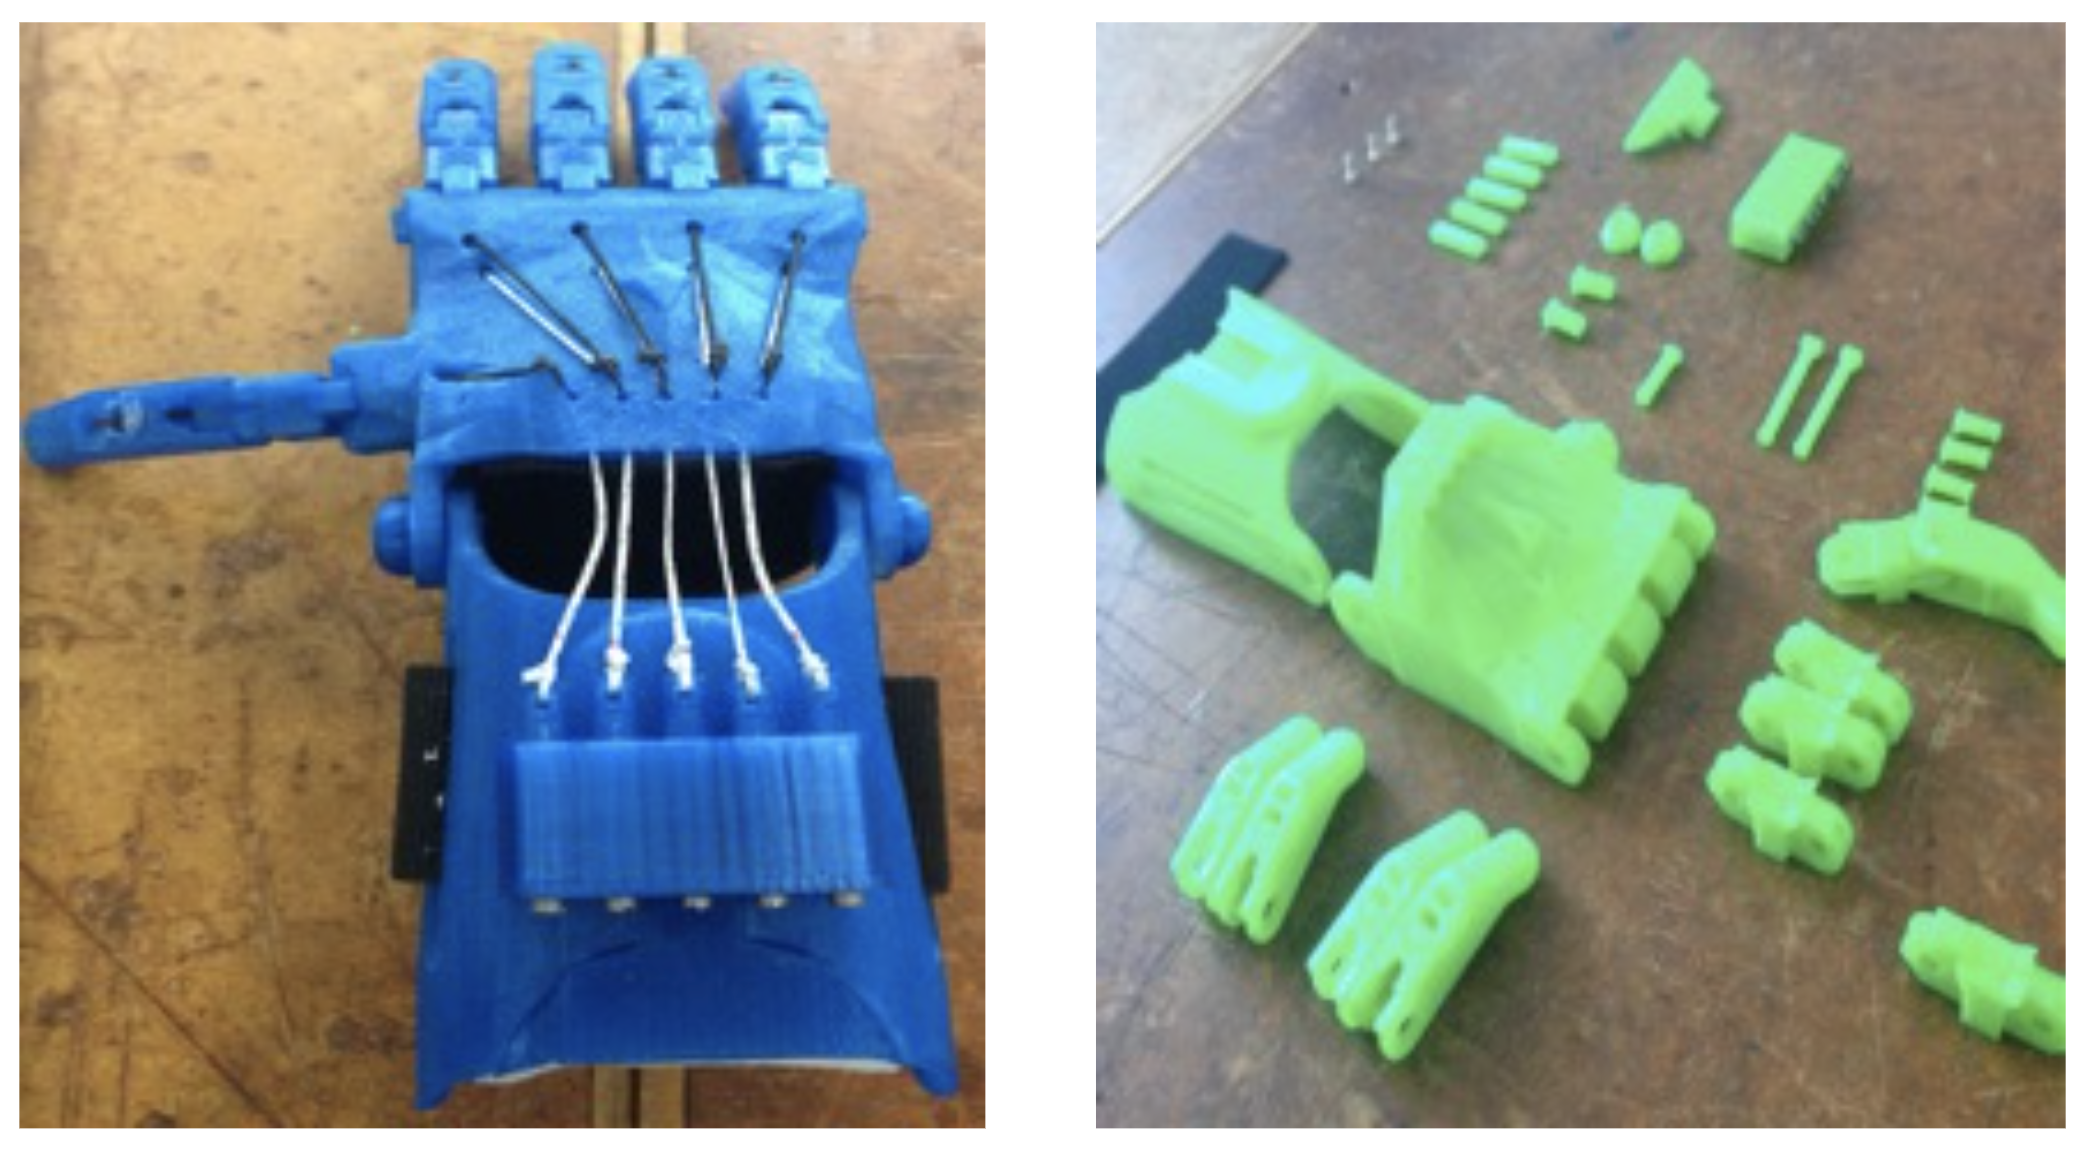 Left: Photo of a blue e-NABLE hand, make from 3D printed parts. Right: Photo of pieces of a green e-NABLE hand, disassembled.